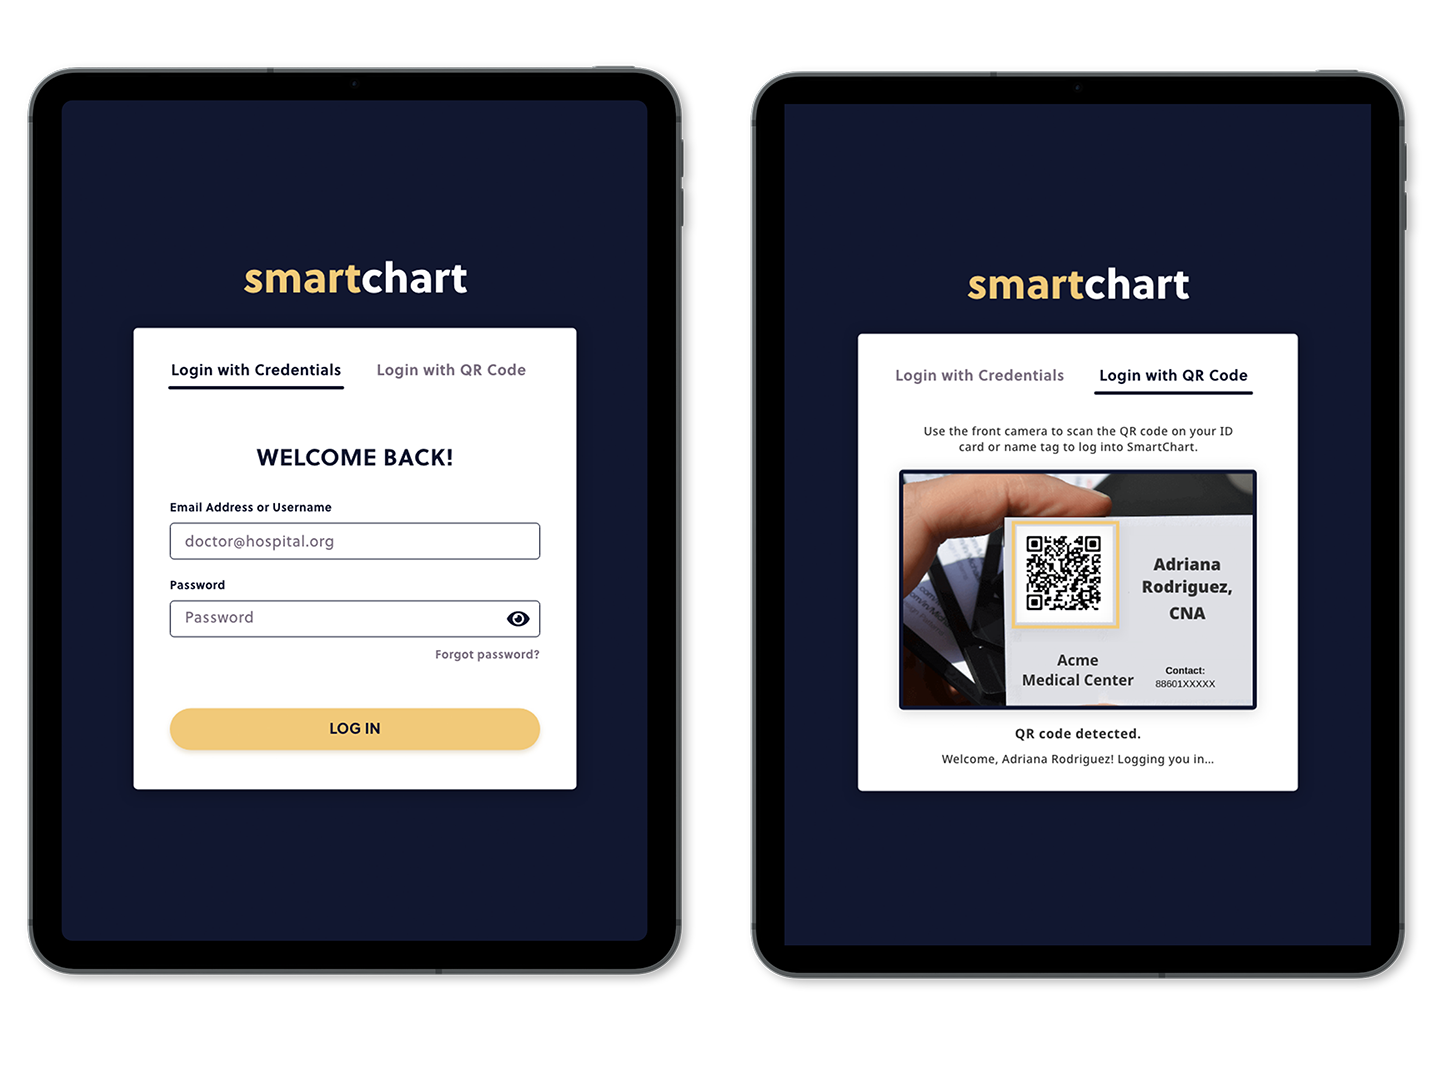 The tabbed login page that allows for authentication with a password or a QR code.